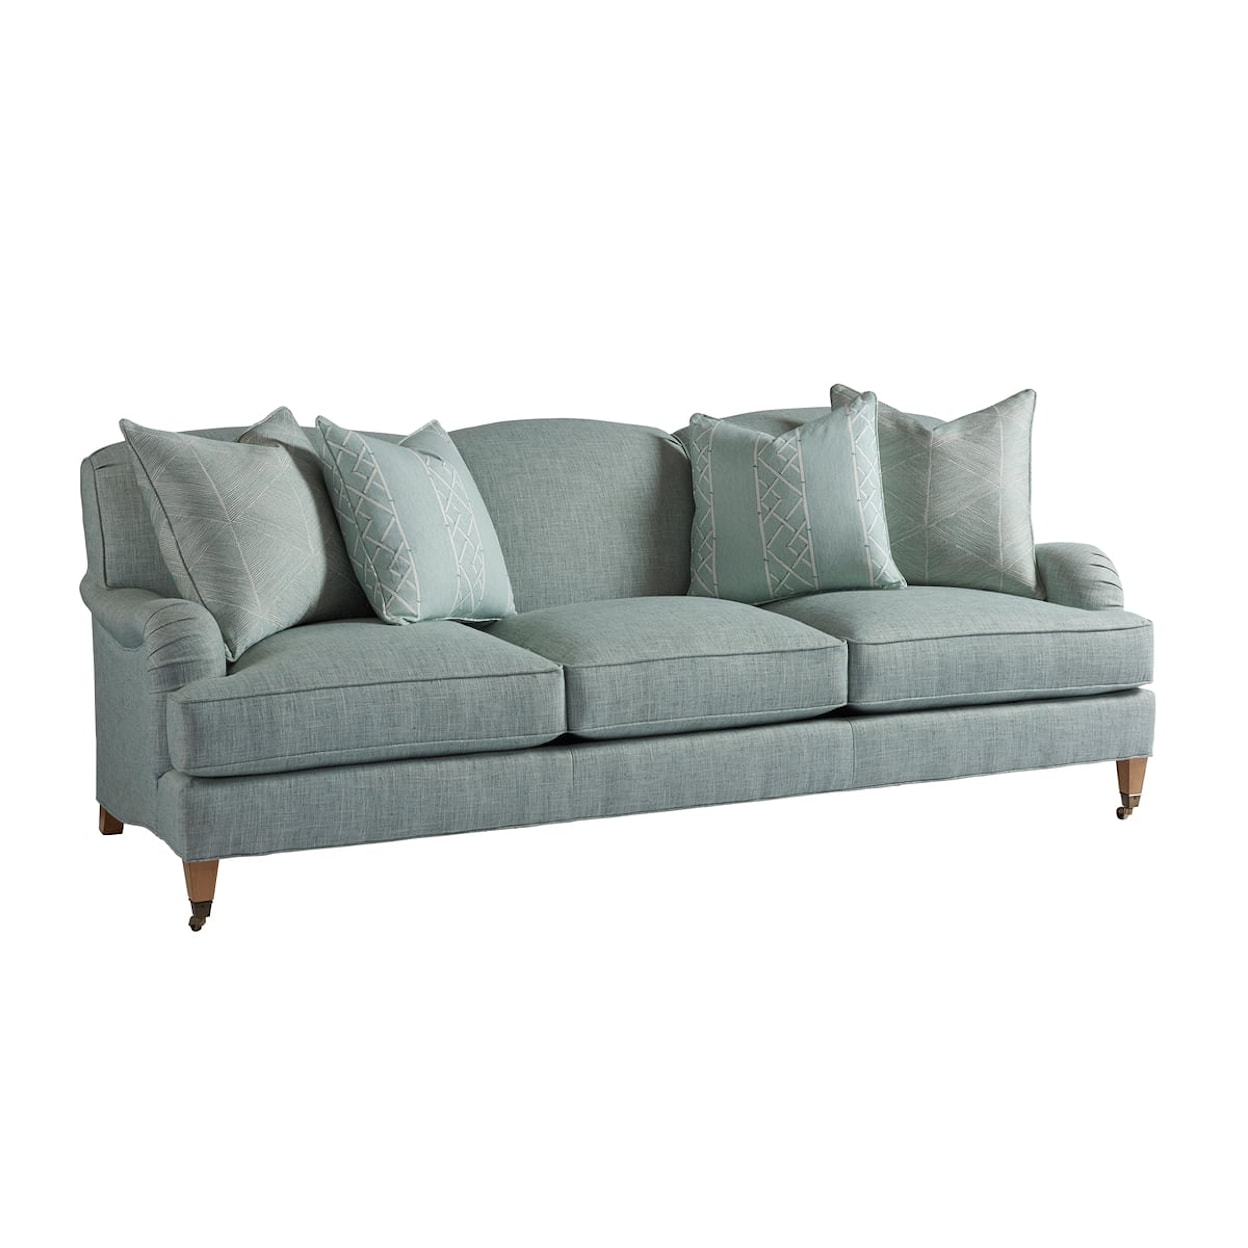 Barclay Butera Barclay Butera Upholstery Sydney Sofa With Pewter Casters